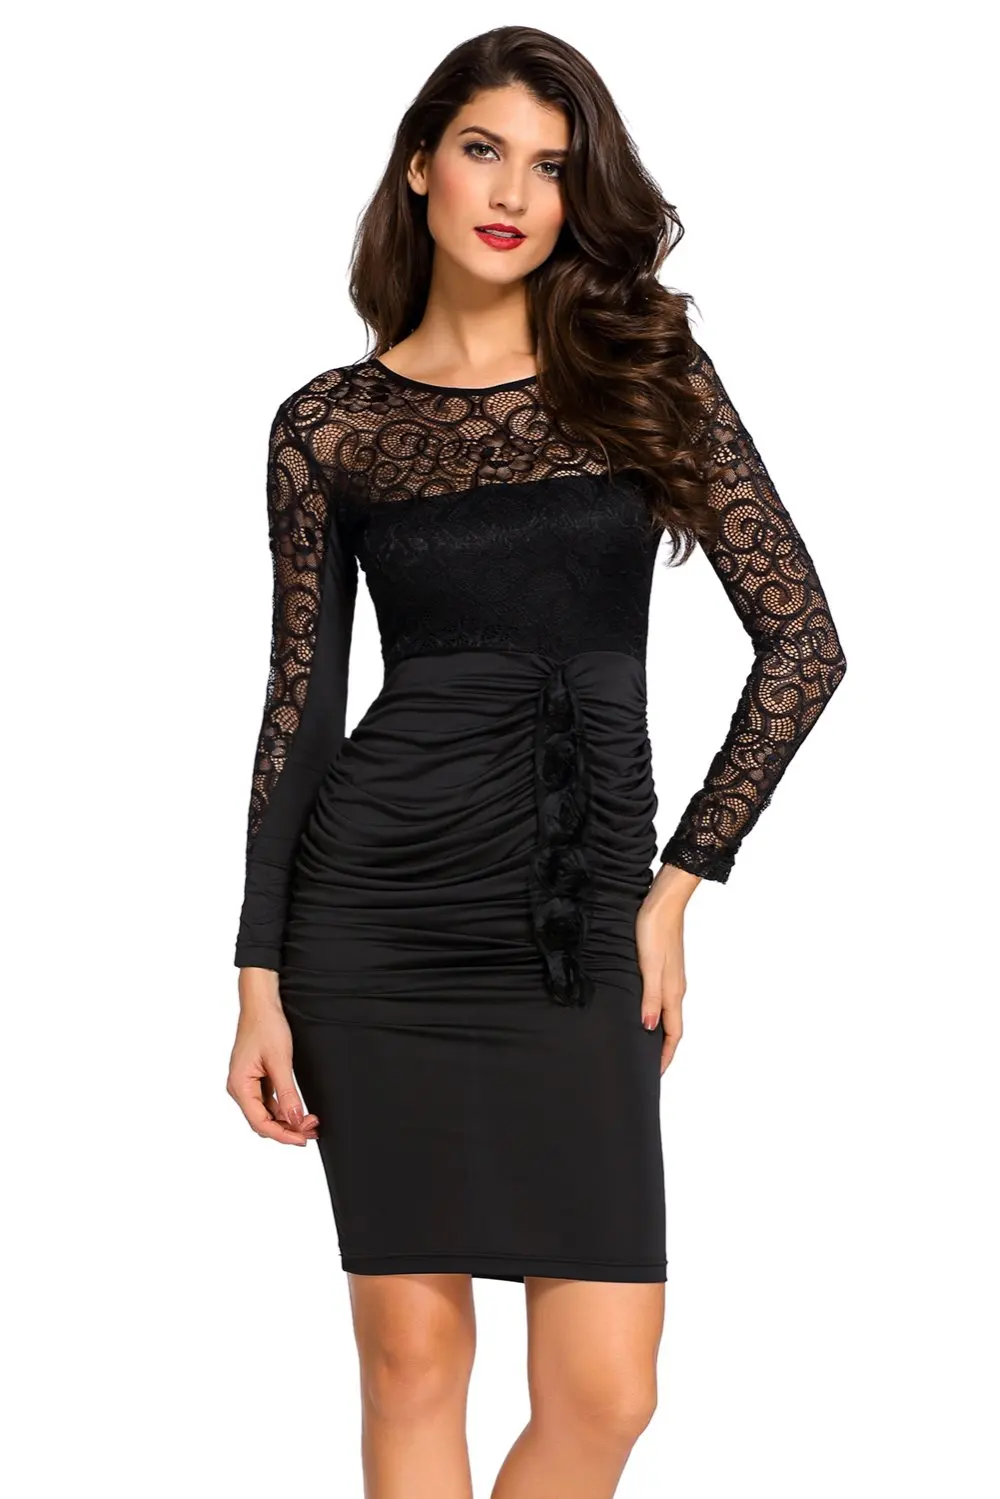 Is a bodycon dress on sale what queen street printable